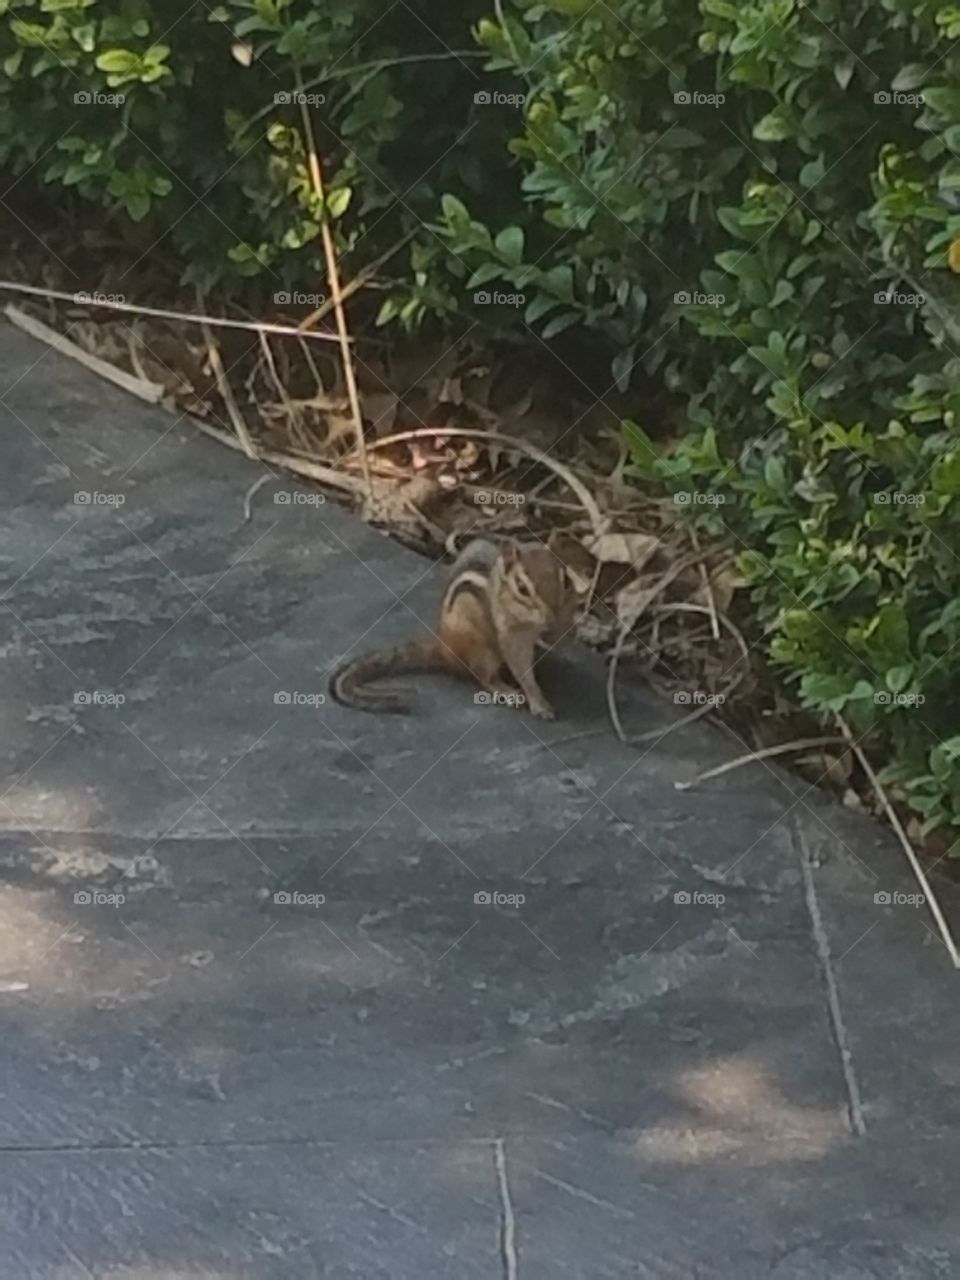 A chipmunk in New York comes out to socialize.